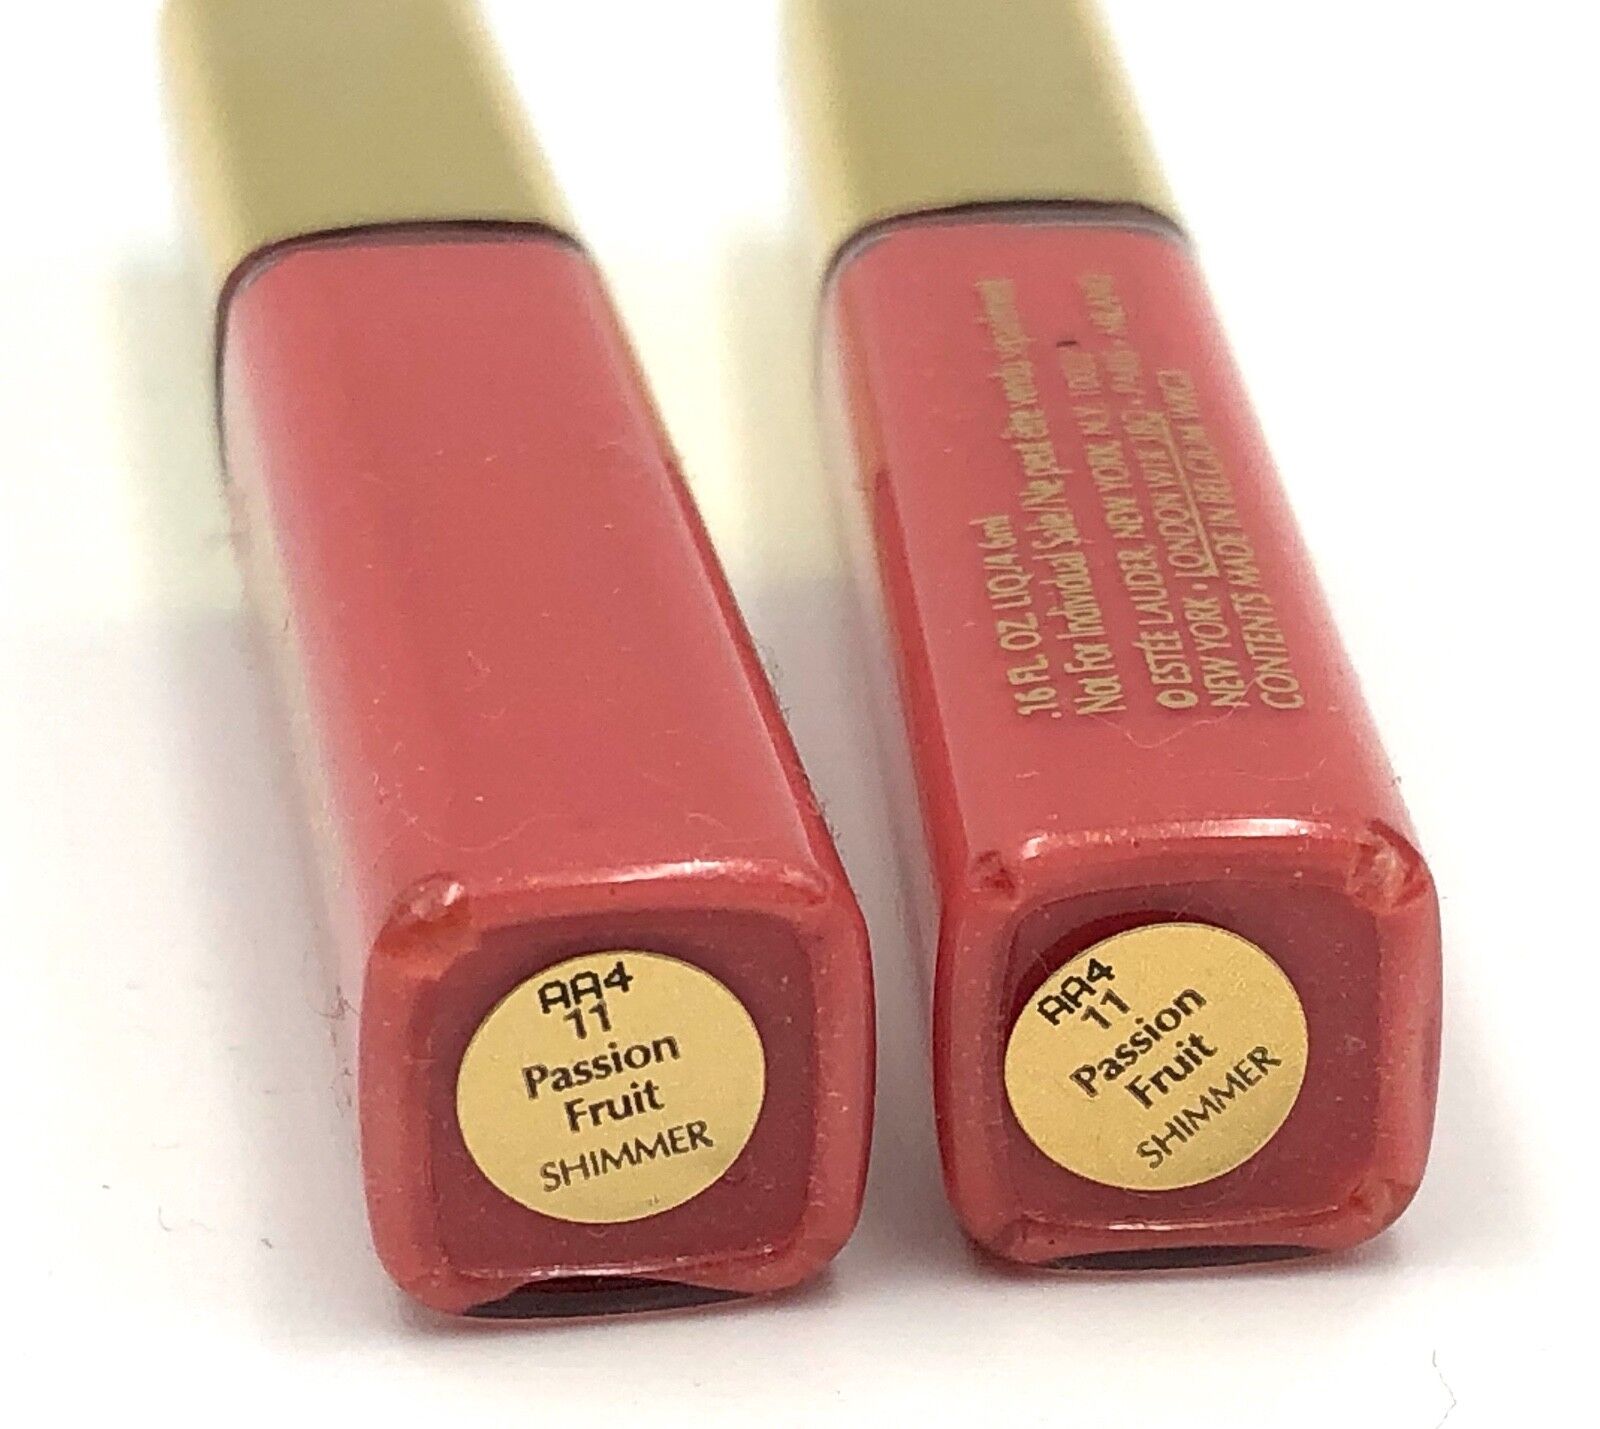 Estee Lauder NEW Pure Color Gloss Swatches And Review